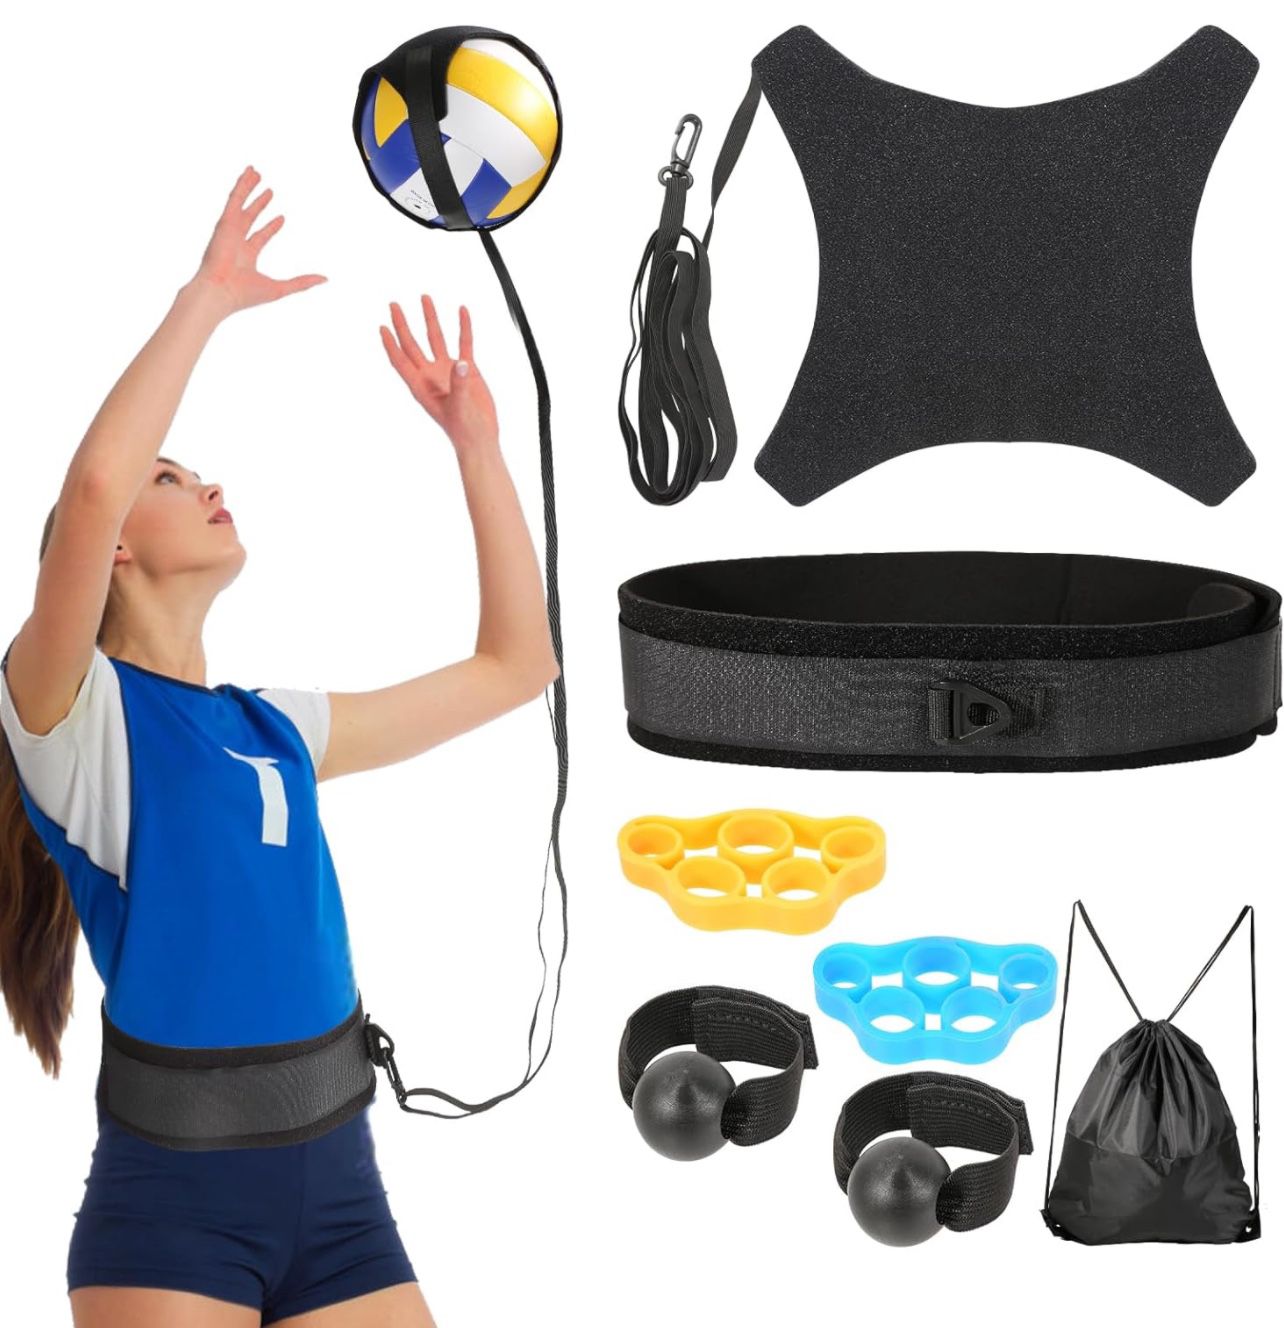 Volleyball Training Equipment Aid,Premium Volleyball Rebounder Trainer Kit,Solo Practice Trainer for Serving Setting Spiking and Arm Swing,Volleyball 